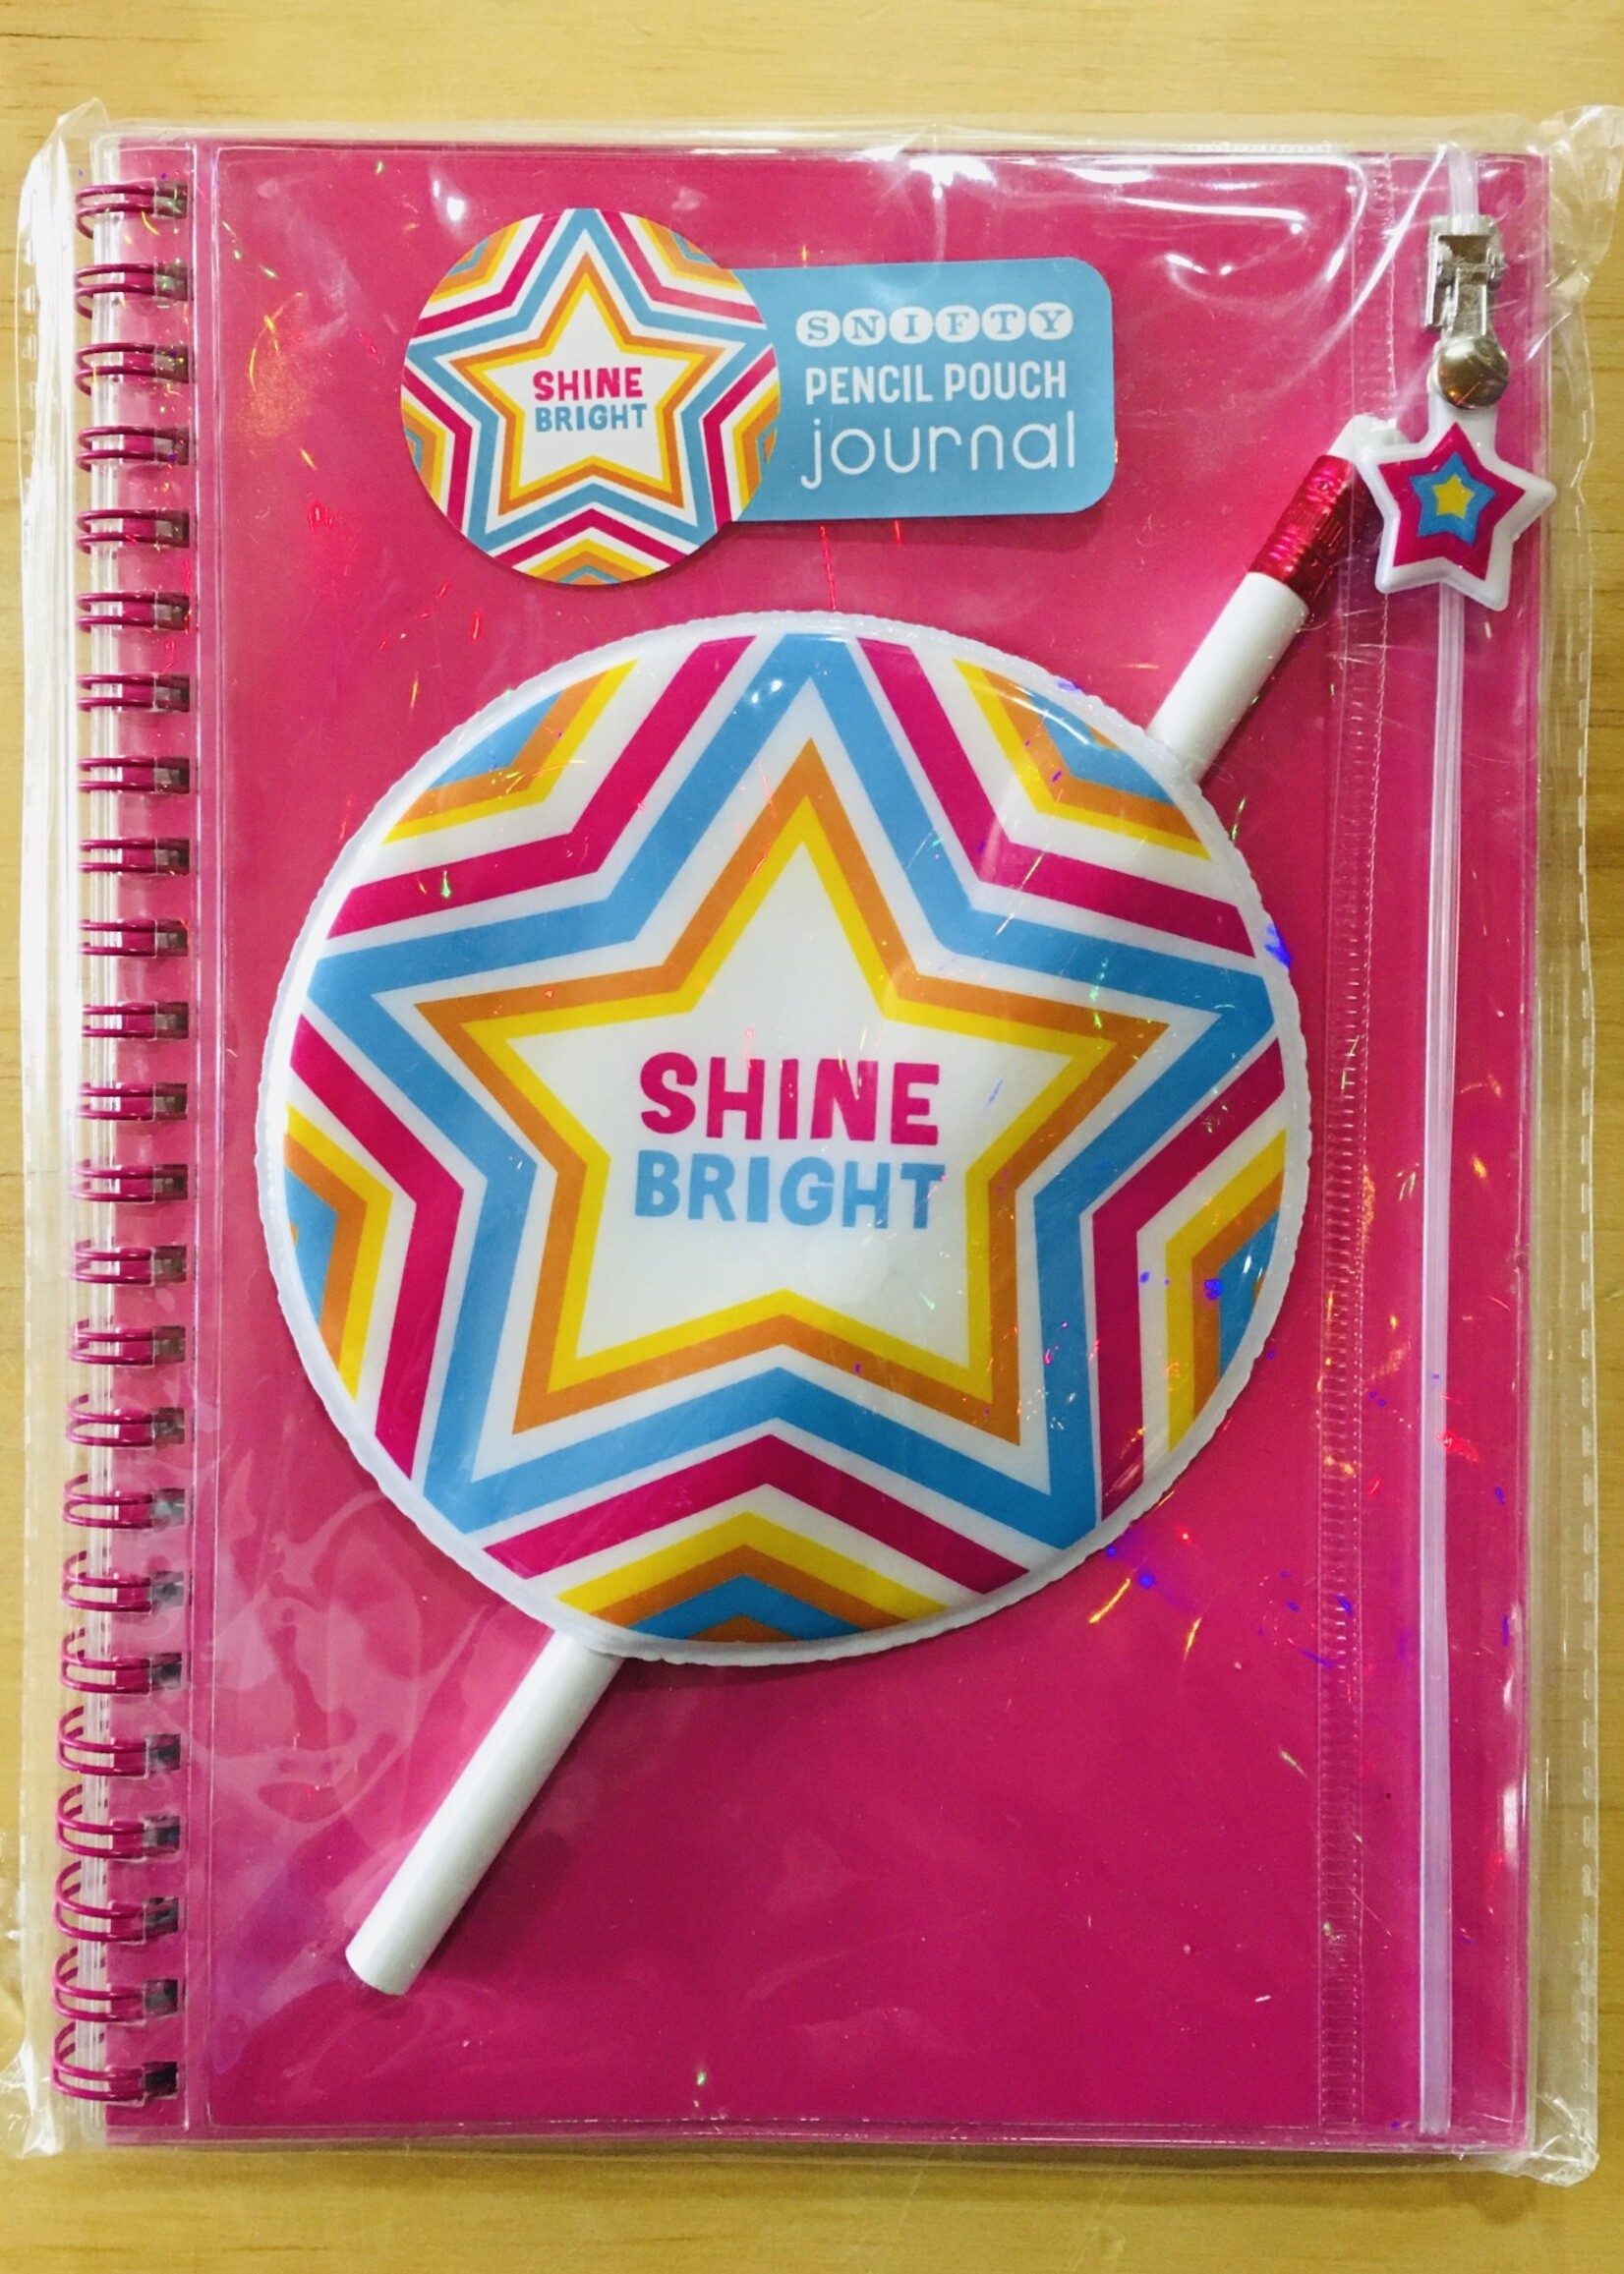 Snifty Pencil Pouch Journal Shine Bright